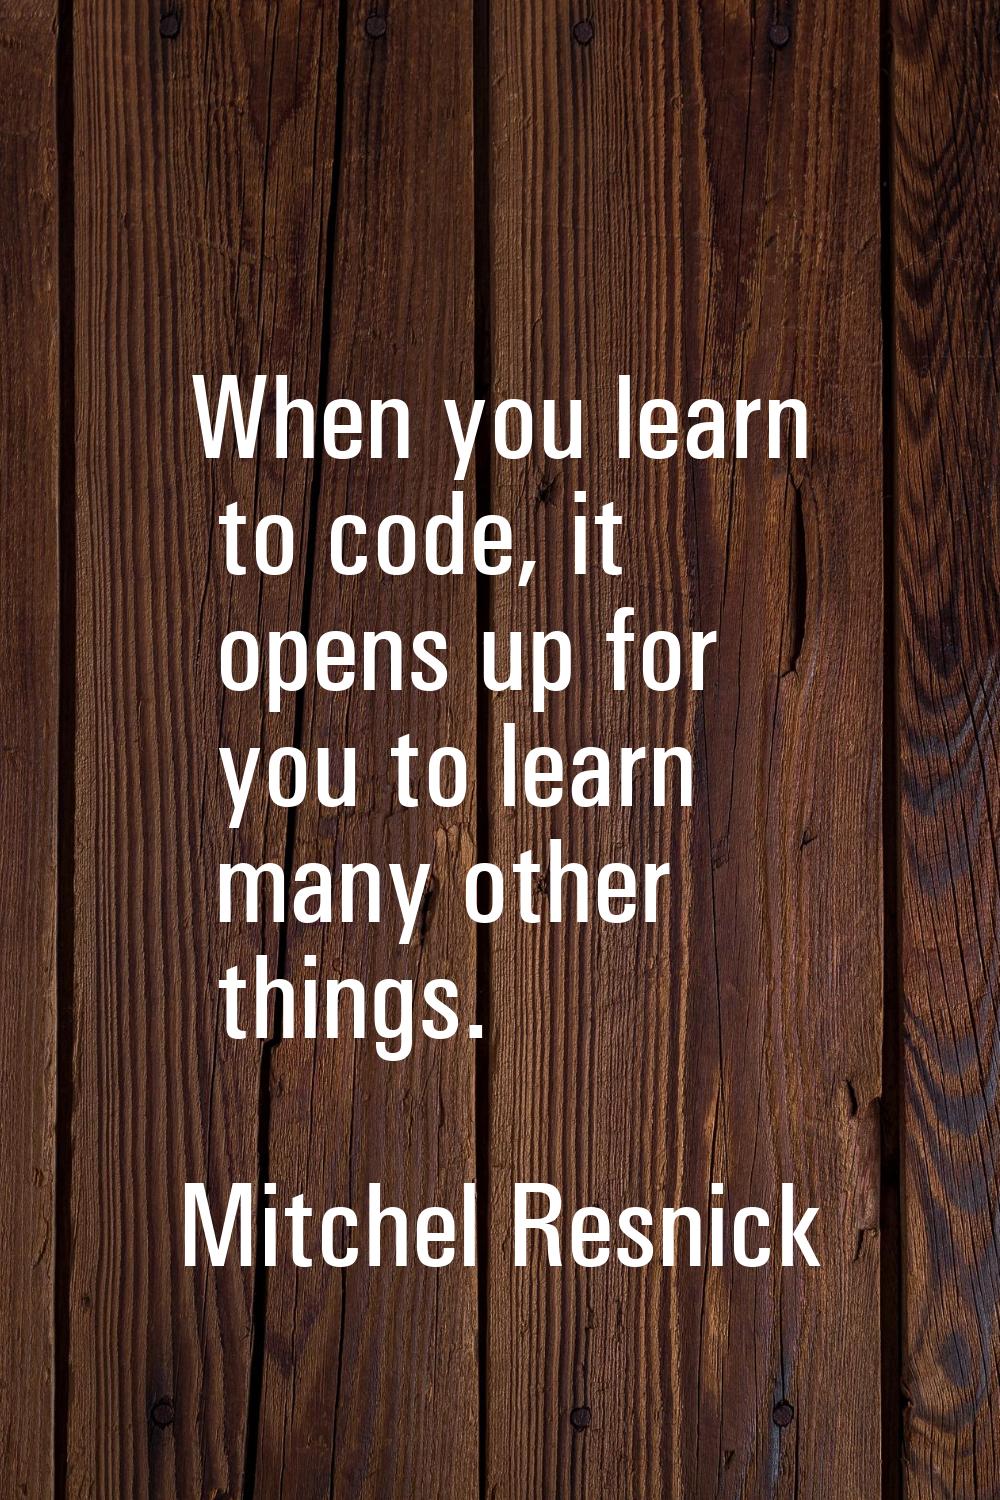 When you learn to code, it opens up for you to learn many other things.